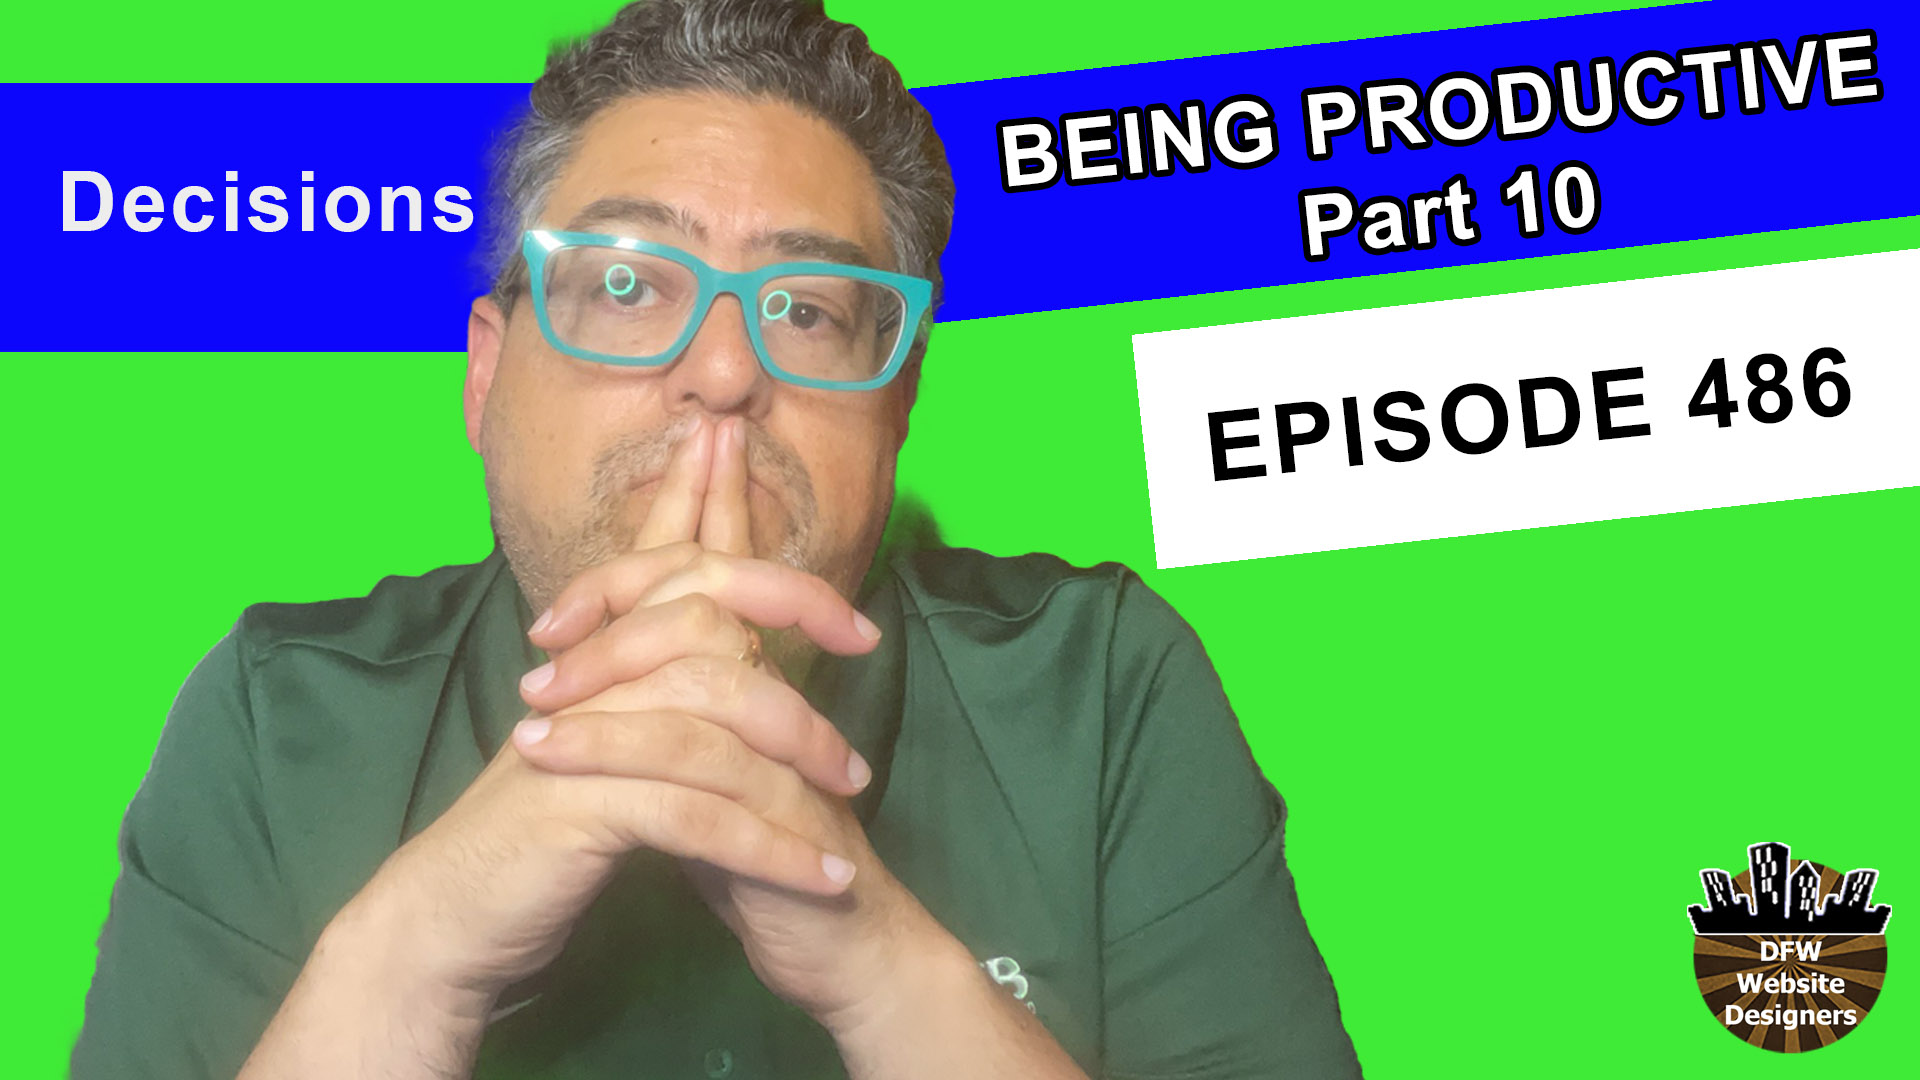 Episode 486 Being Productive Part 10 Decisions: Doing Here, Next Action, Who Has It